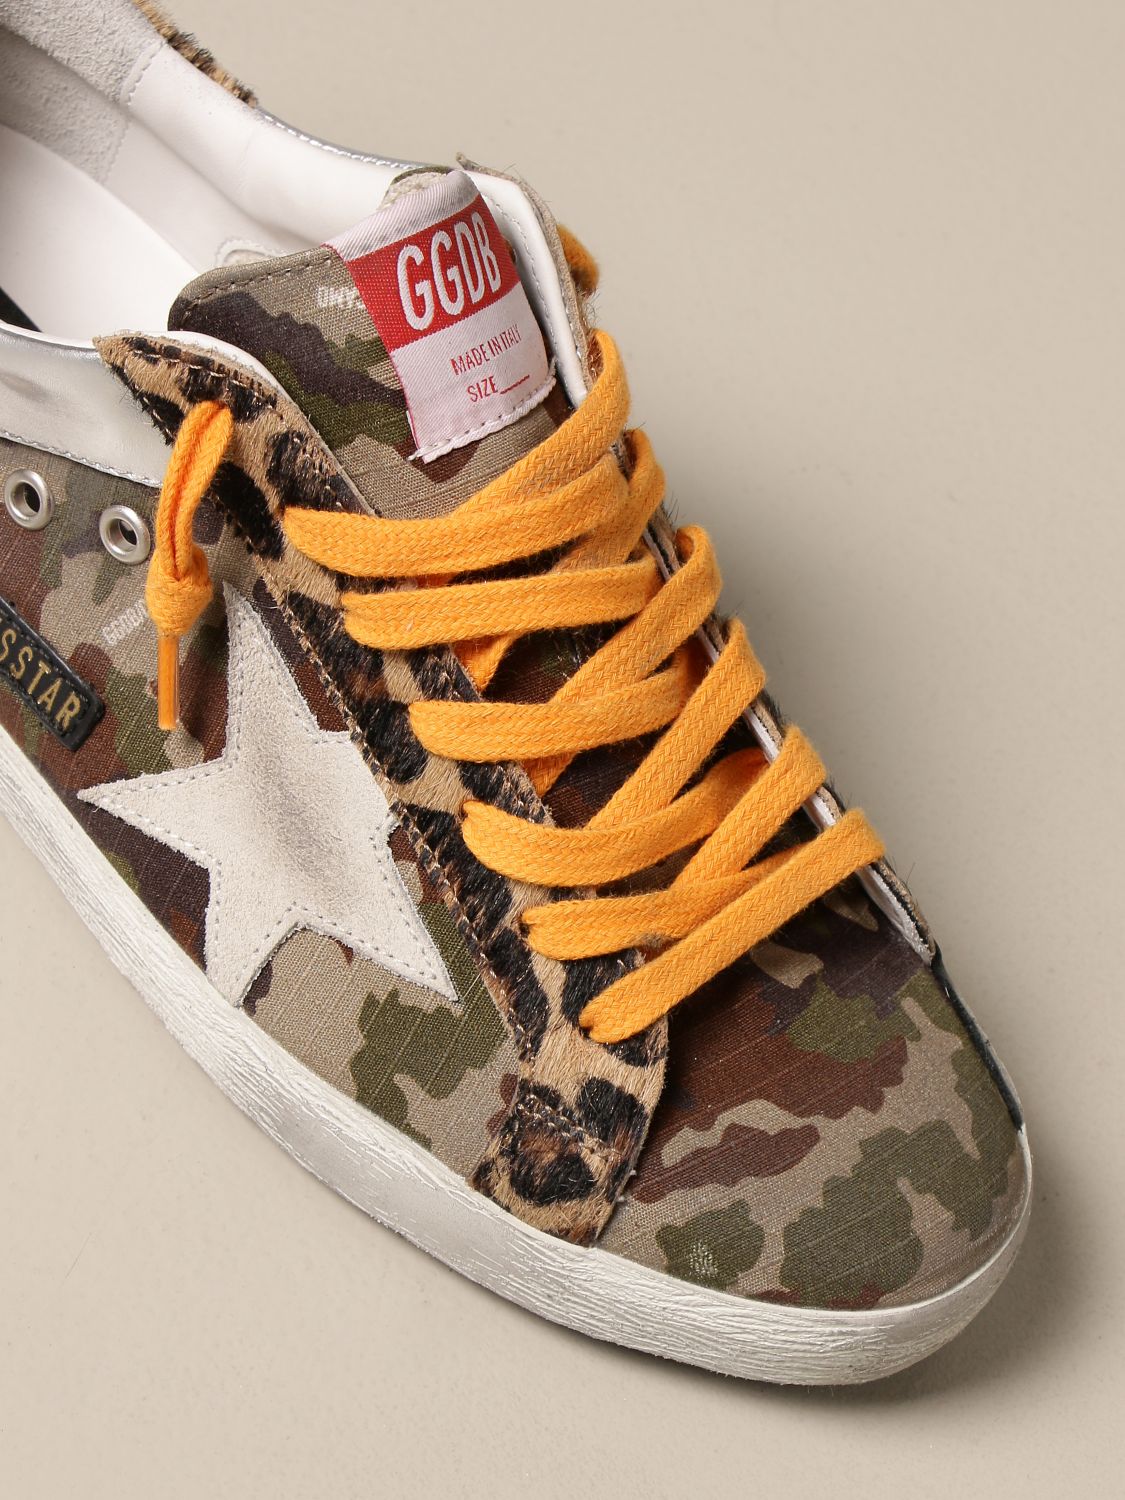 GOLDEN GOOSE: Superstar sneakers in camouflage canvas Sneakers Golden Goose Men Brown | Sneakers Golden Goose GMF00103.F000350.80308 GIGLIO.COM